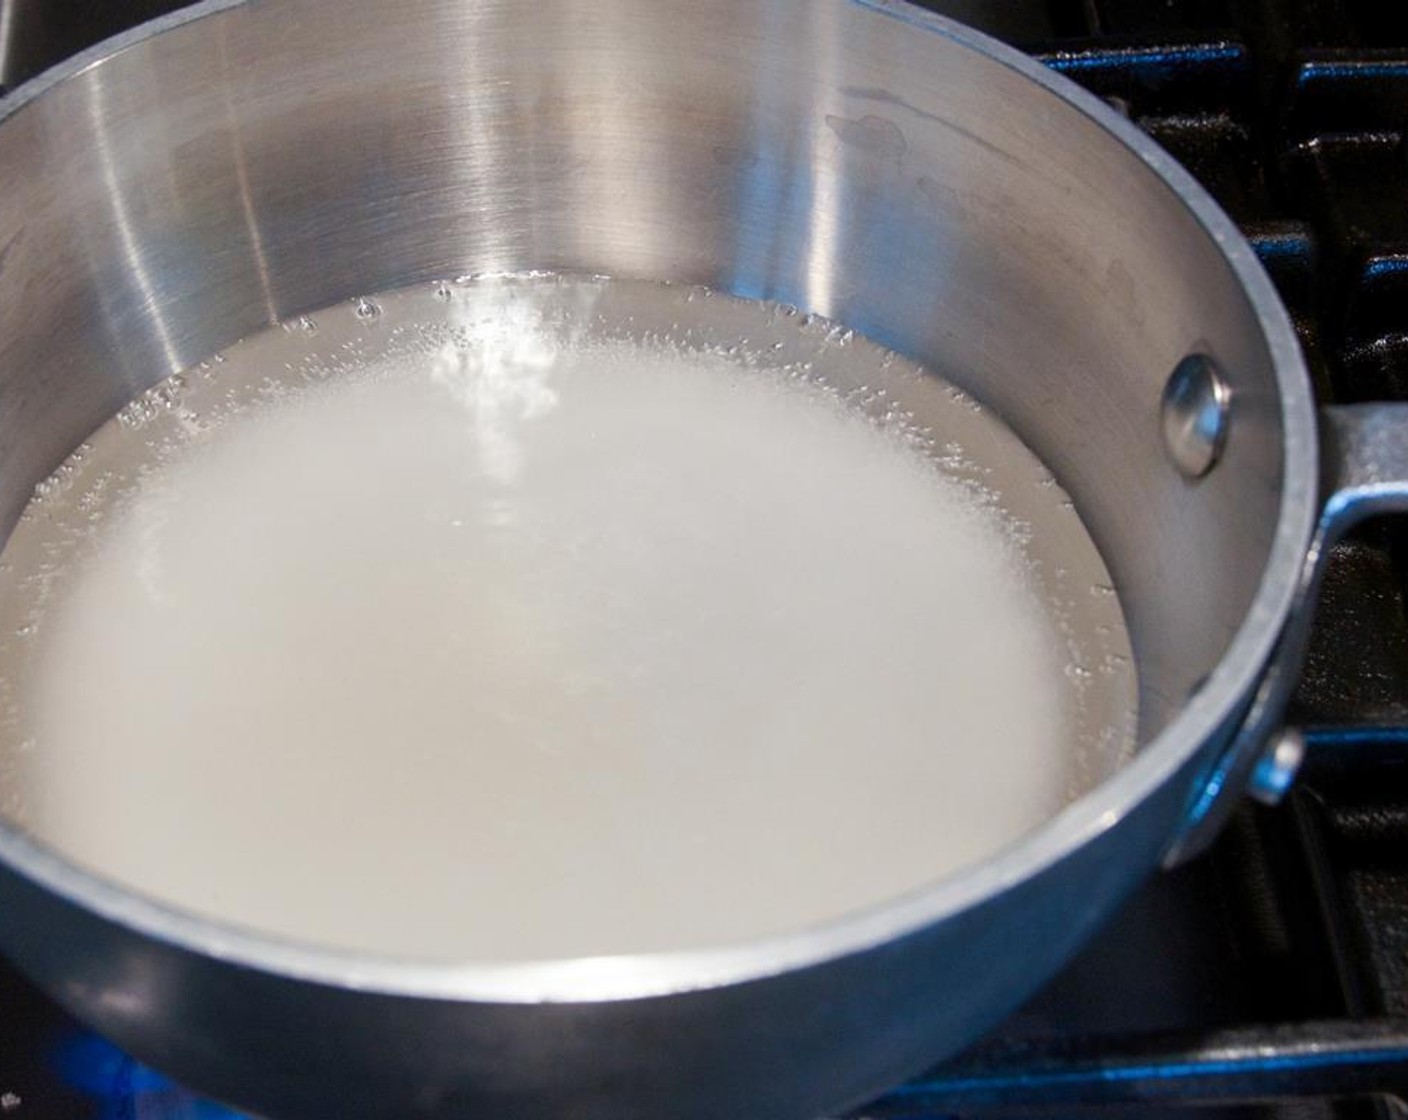 step 1 To make simple syrup, combine Water (1/3 cup) and Granulated Sugar (1/3 cup) in a small bowl. Bring to a boil and cook until sugar is completely dissolved. Cool to room temperature.